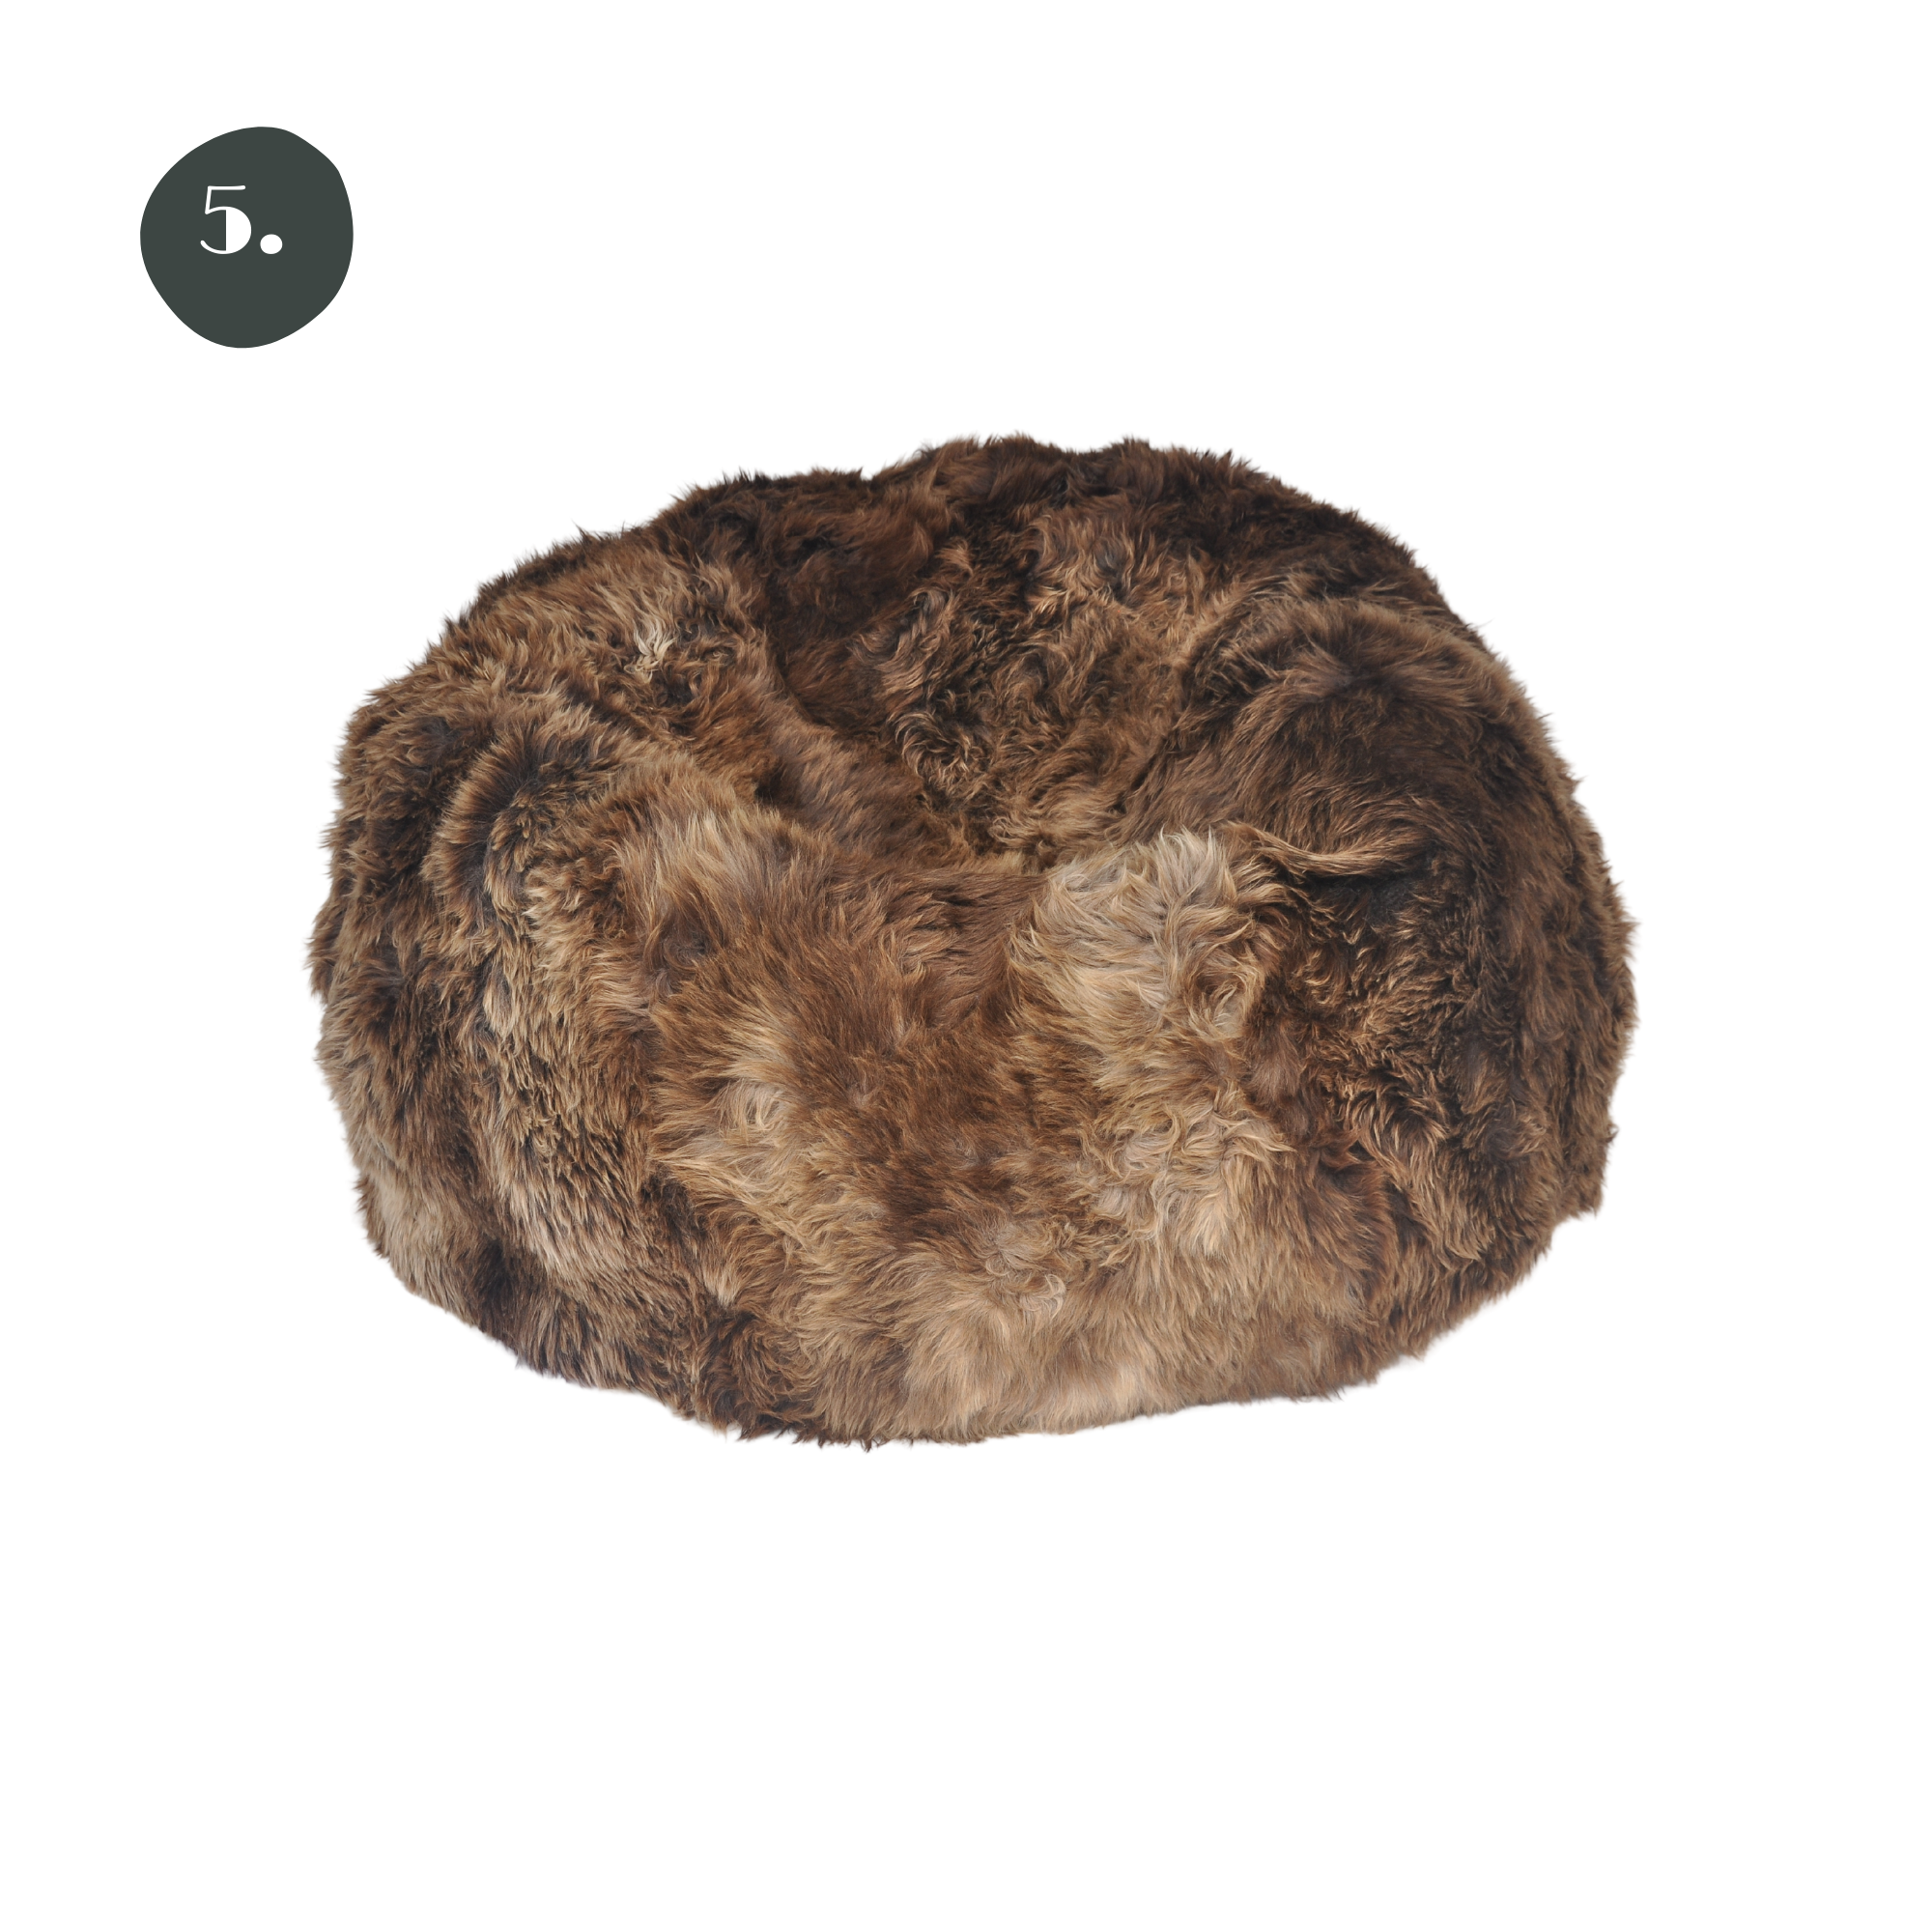 Long Wool Sheepskin Bean Bag • Natural Brown #5. Chocolate brown wool with lighter brown and creamy brown highlights throughout the wool pile.  